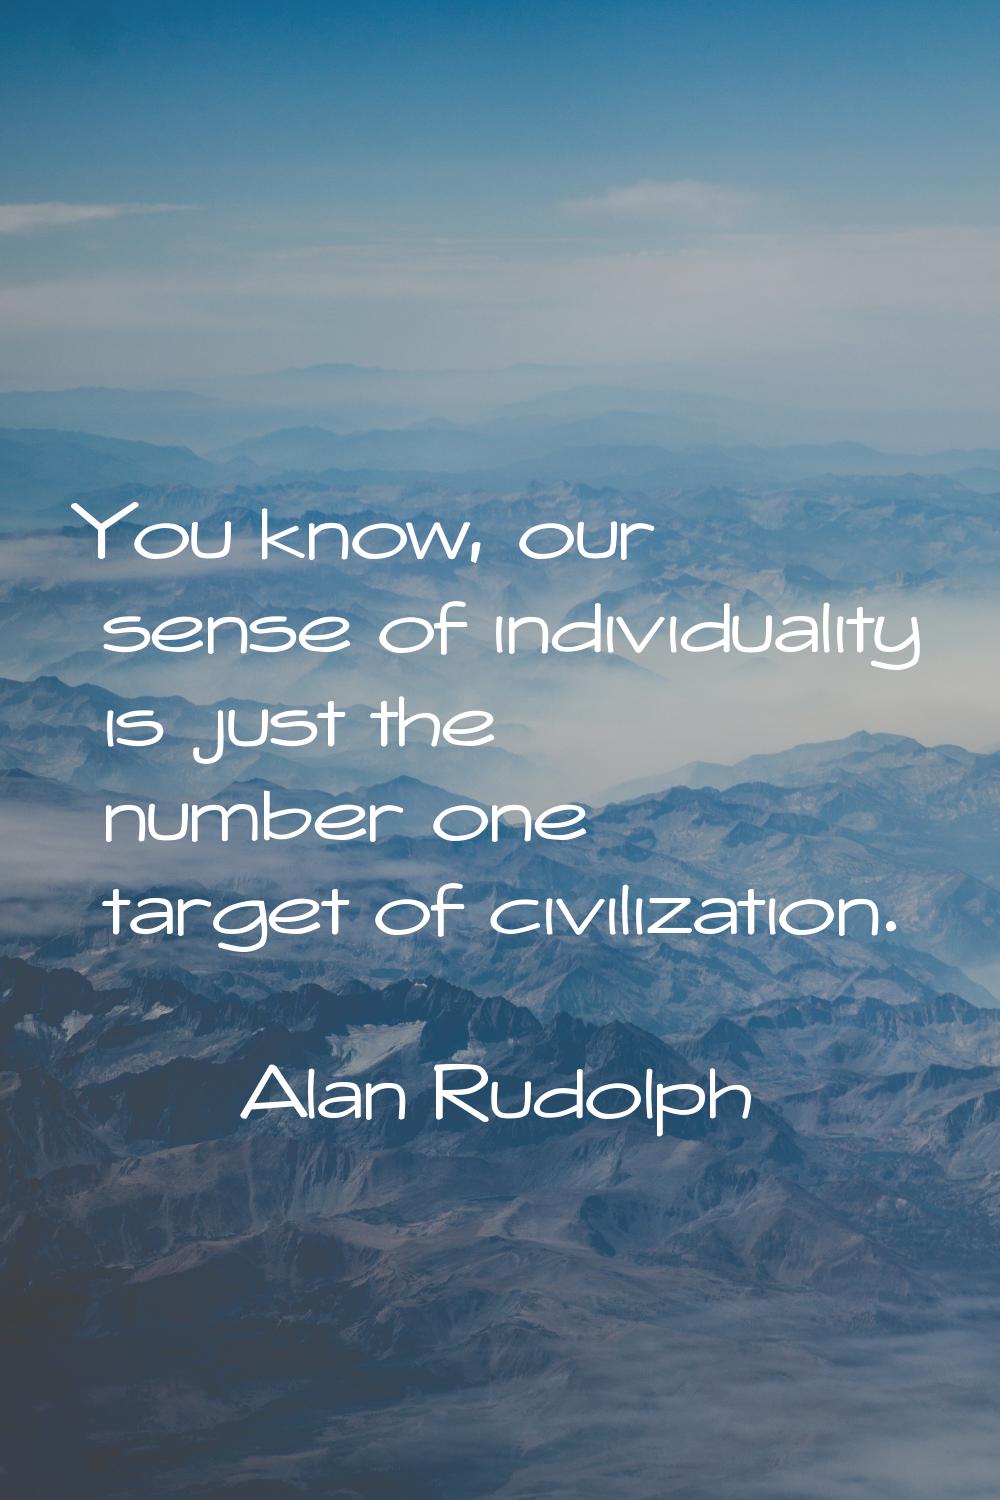 You know, our sense of individuality is just the number one target of civilization.